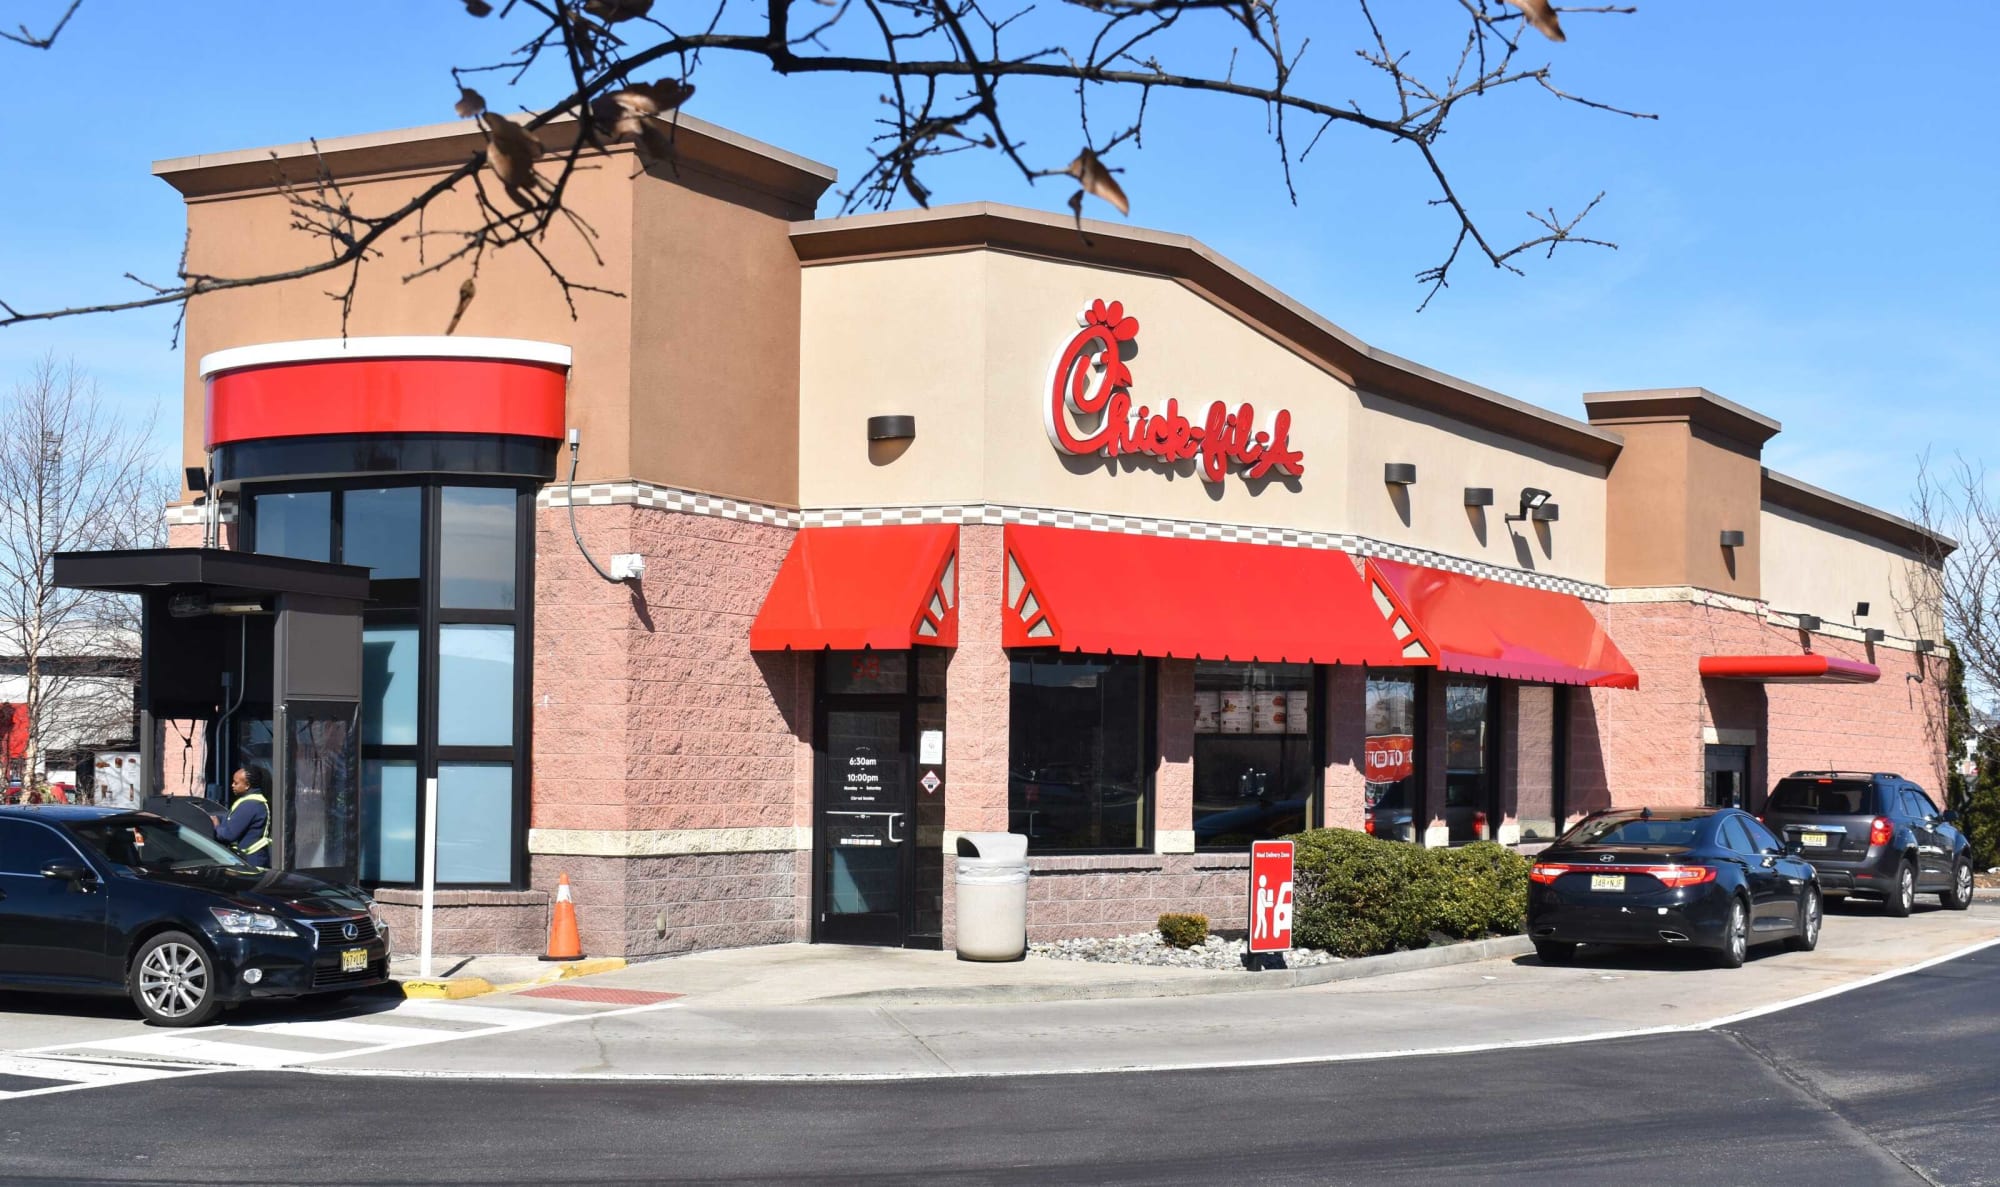 ChickfilA New Year's Eve hours Is ChickfilA open on New Year's Eve